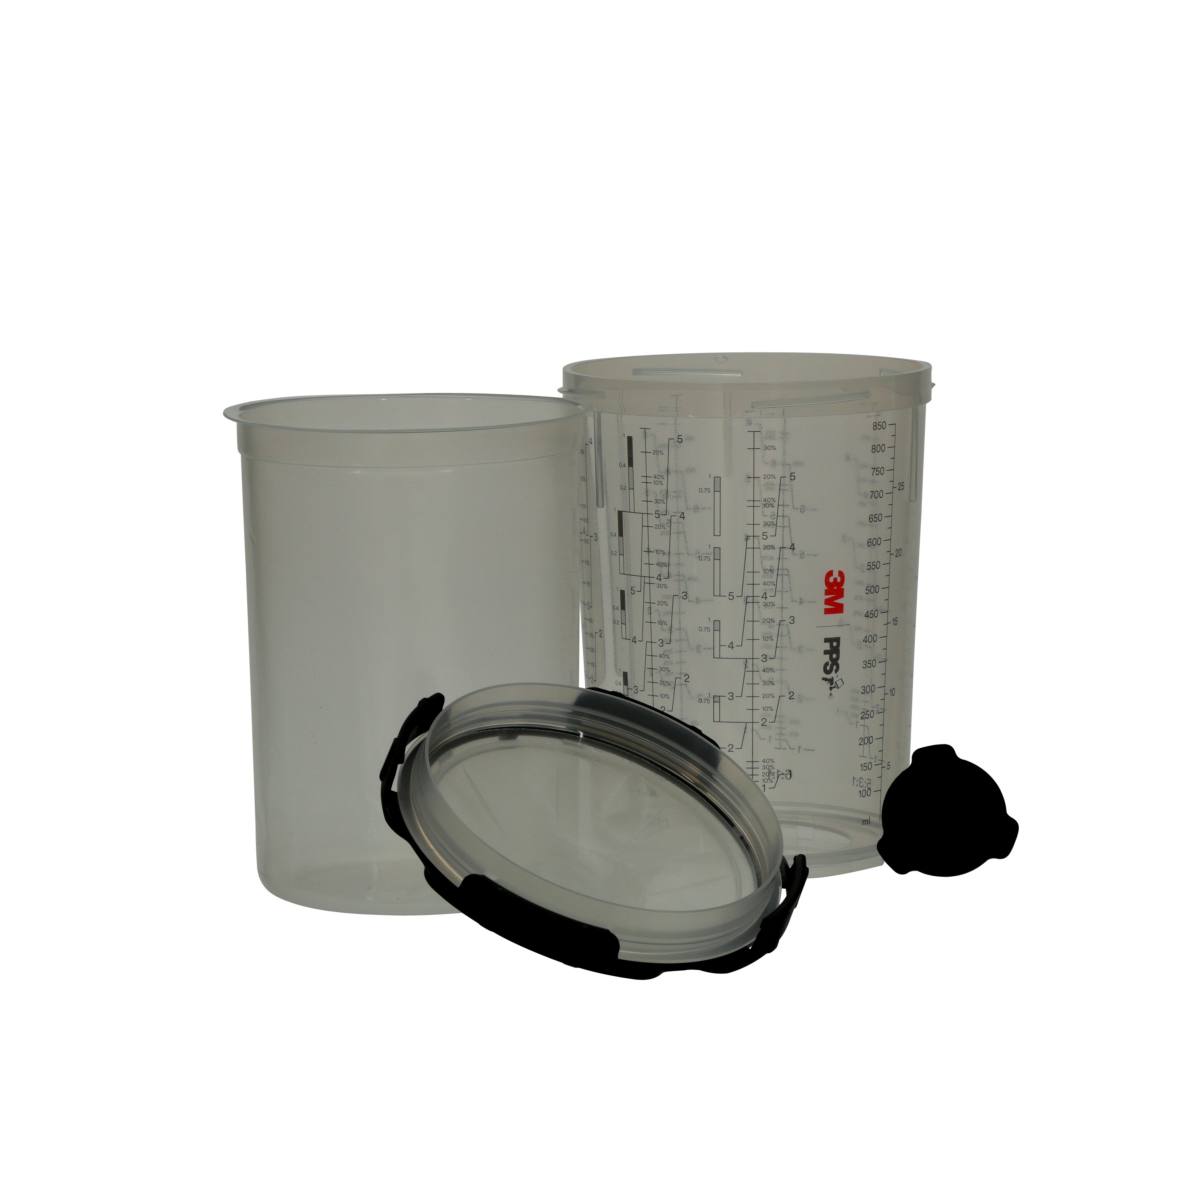 3M PPS Series 2.0 set, large, 850 ml, 125Î¼ filter, 50 inner cups / 50 lids / 32 sealing caps / 1 outer cup #26740